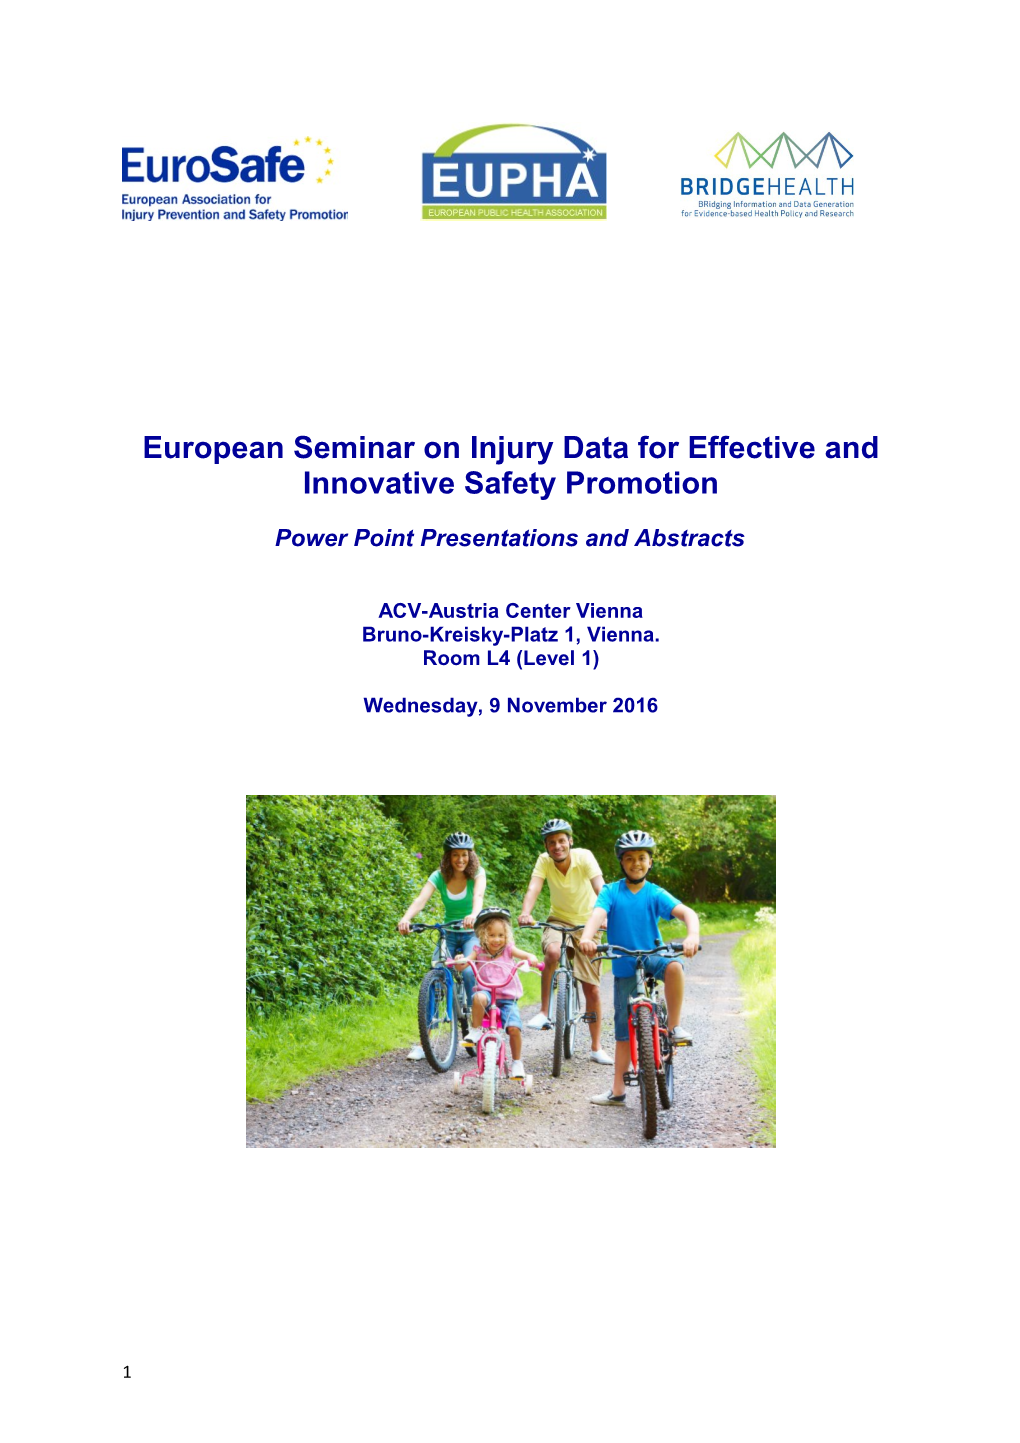 European Seminar on Injury Data for Effective and Innovative Safety Promotion